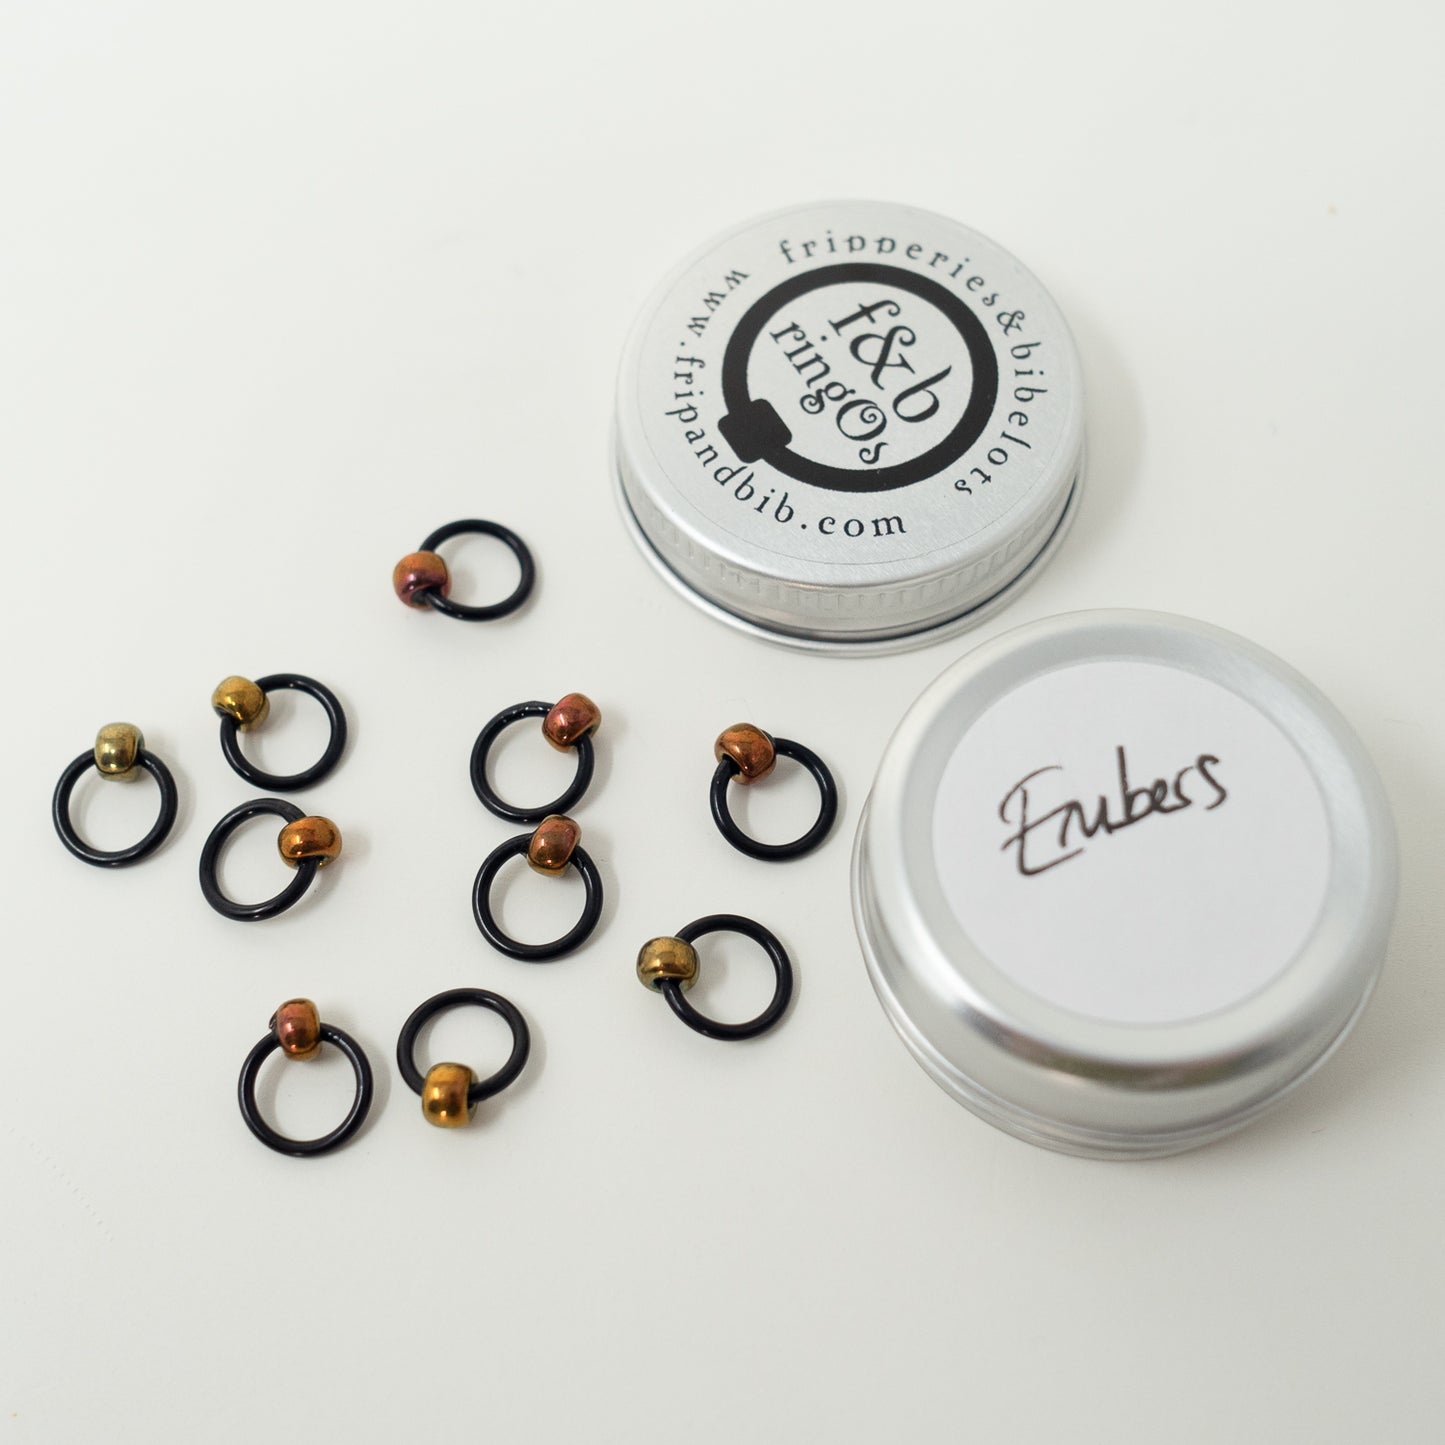 RingOs Stitch Markers by Fripperies & Bibelots